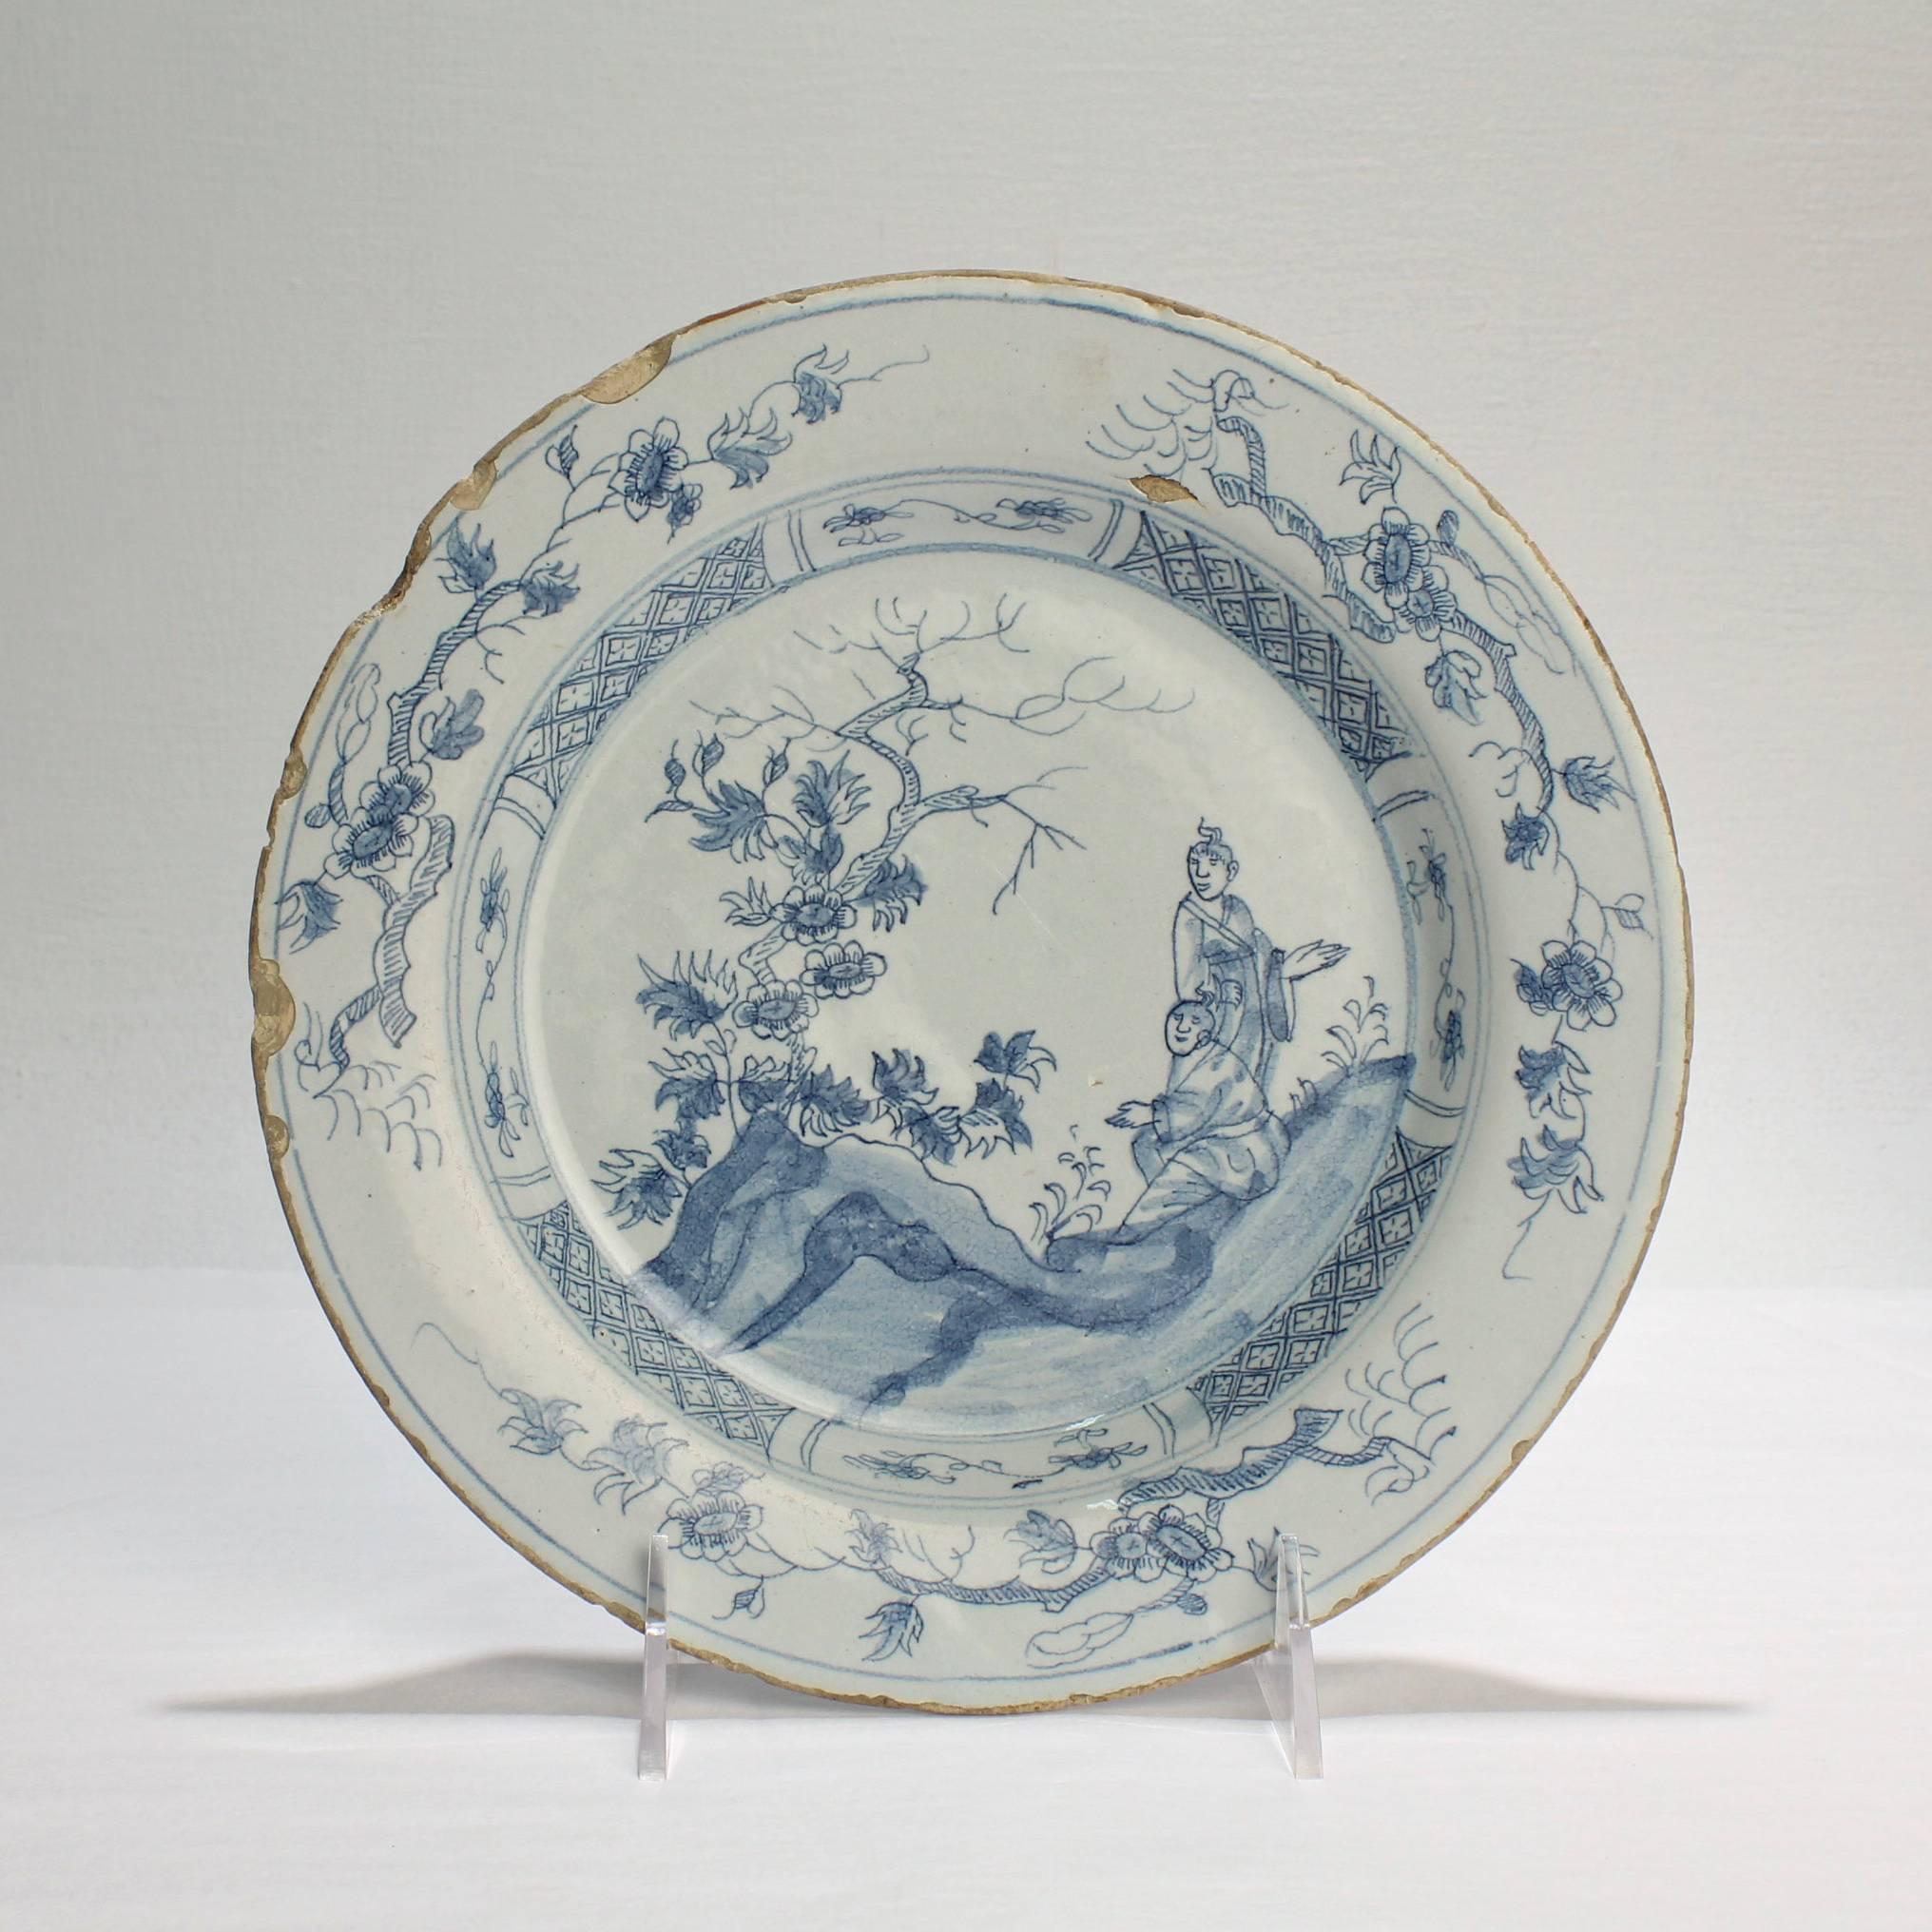 Pair of 18th Century Blue and White English Delft Plates (George III.)